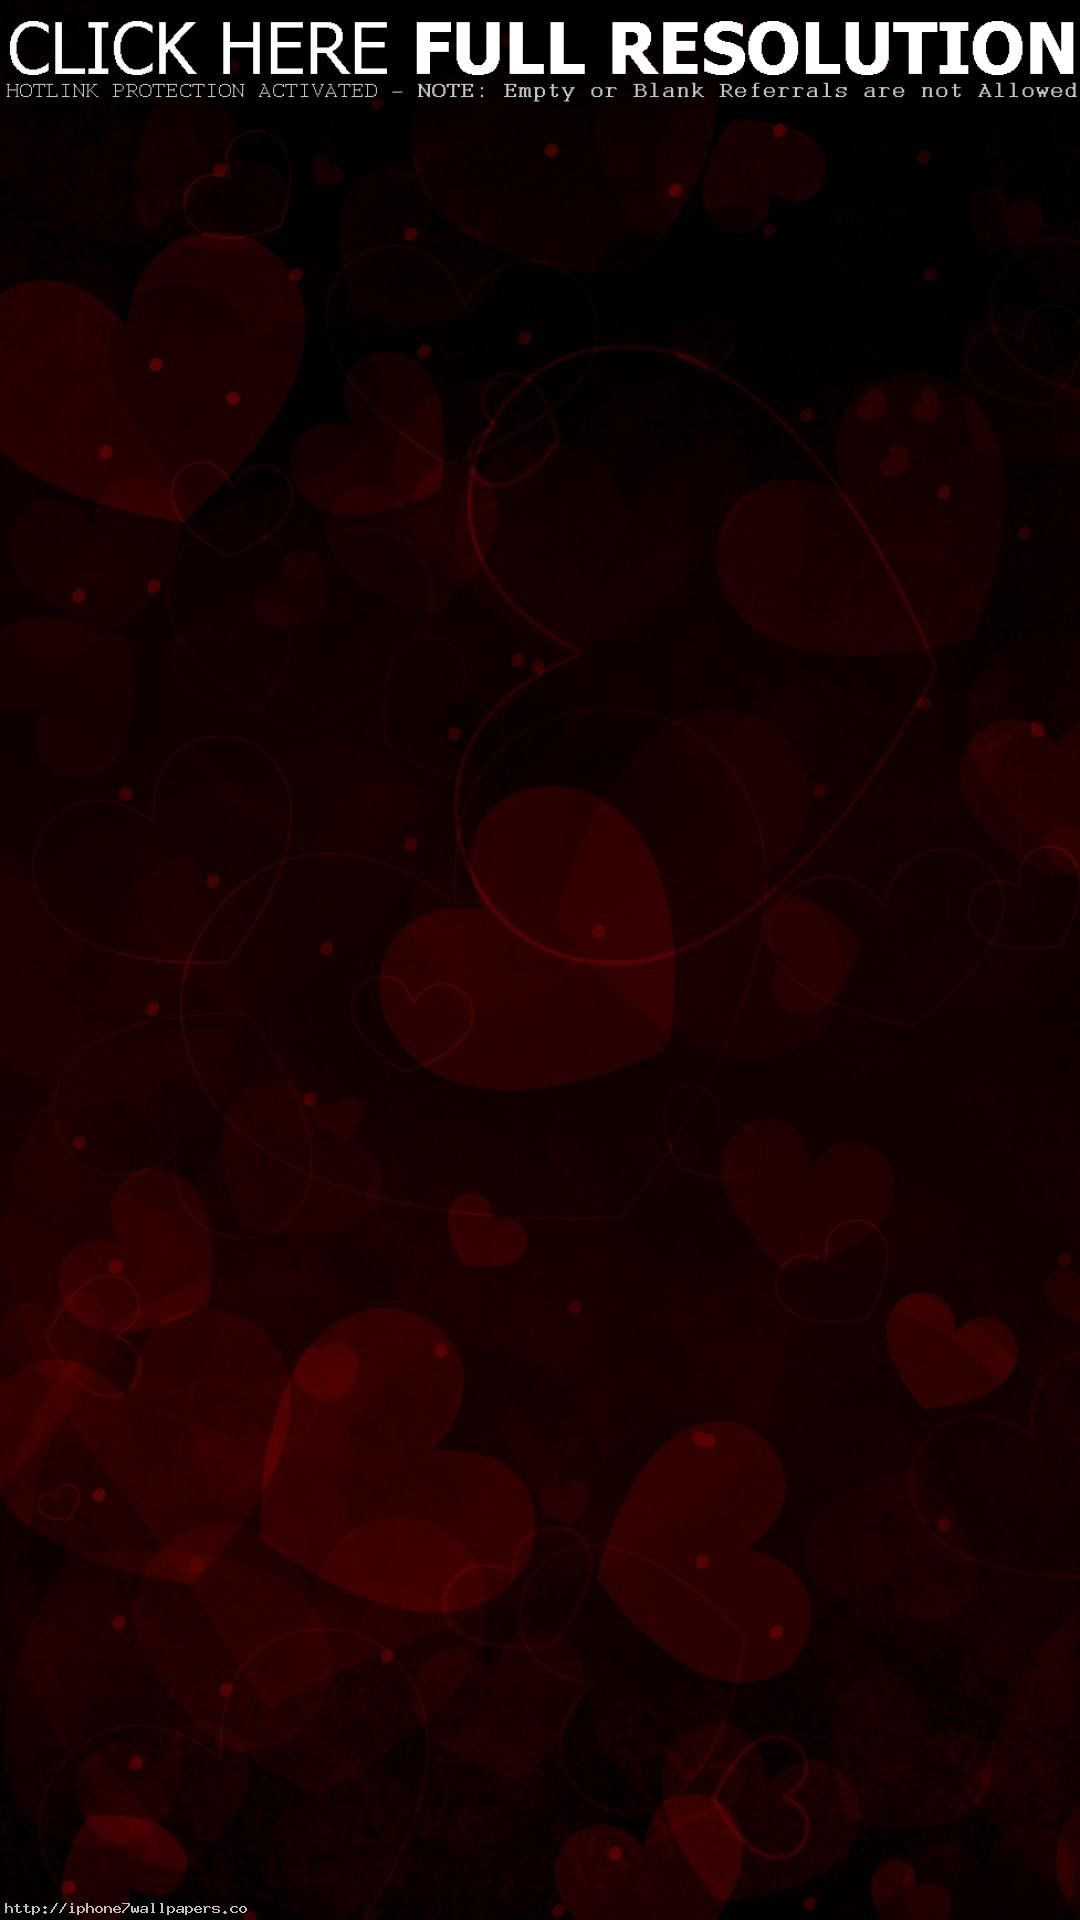 Free Red and Black Heart Wallpaper Background Vector Image